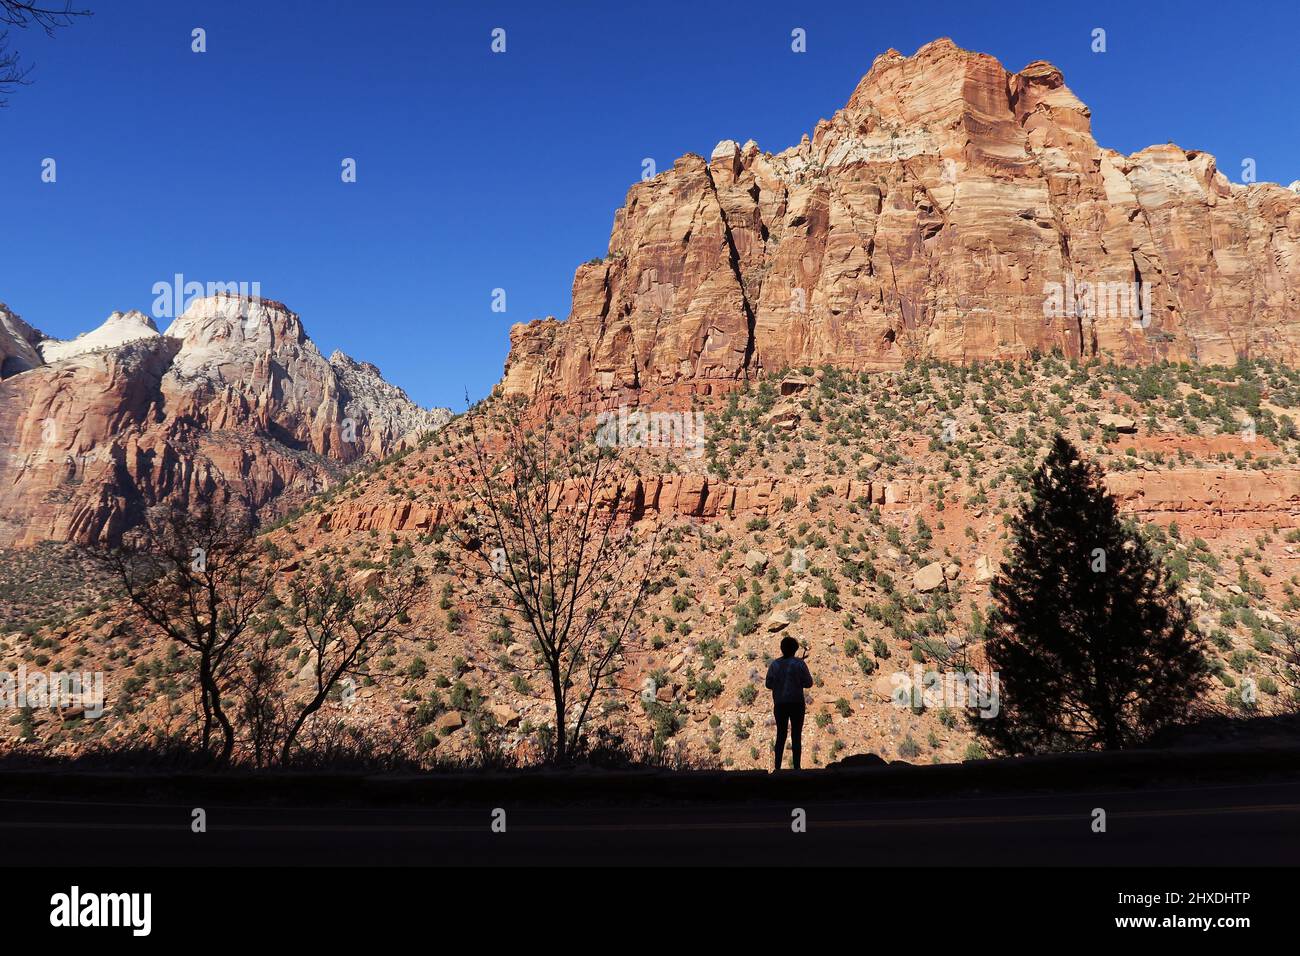 person silhouetted in Zion National Park Utah Stock Photo